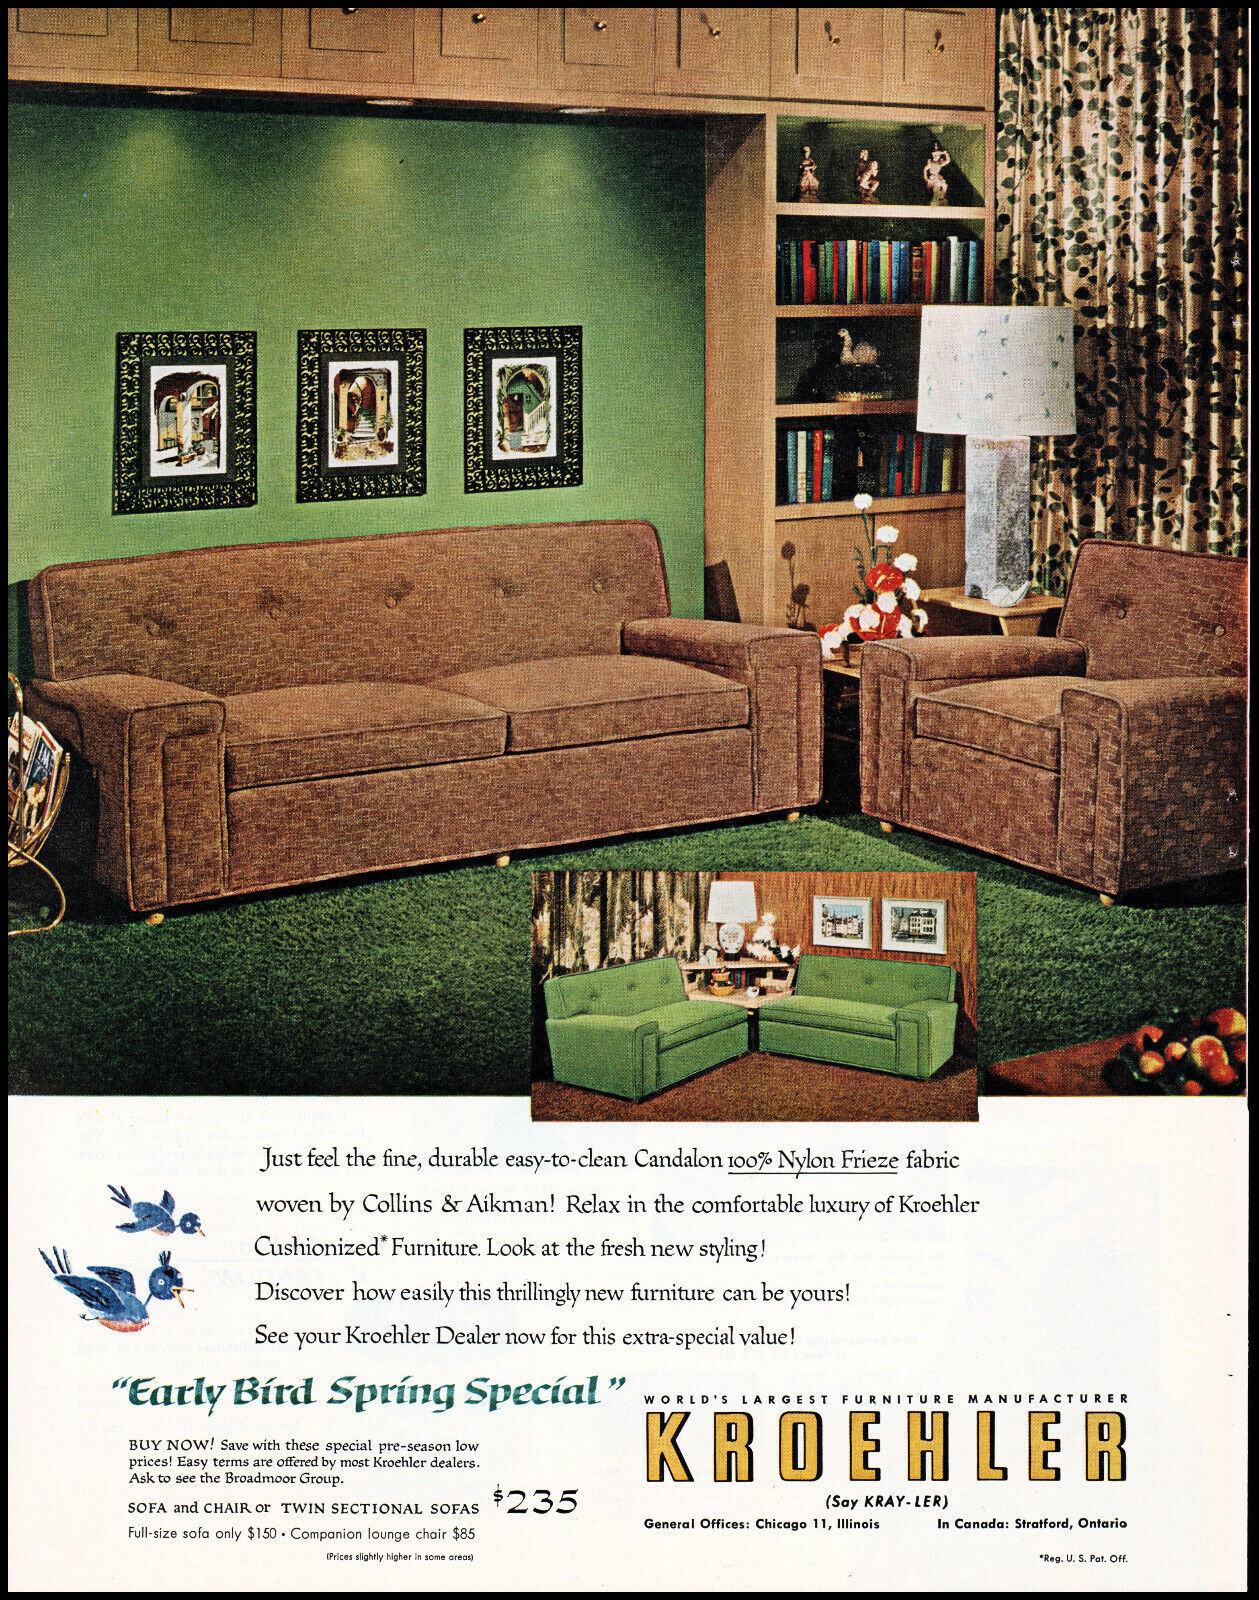 1954 Kroehler Home Furniture Early Bird Spring Special Retro Photo Print Ad L93